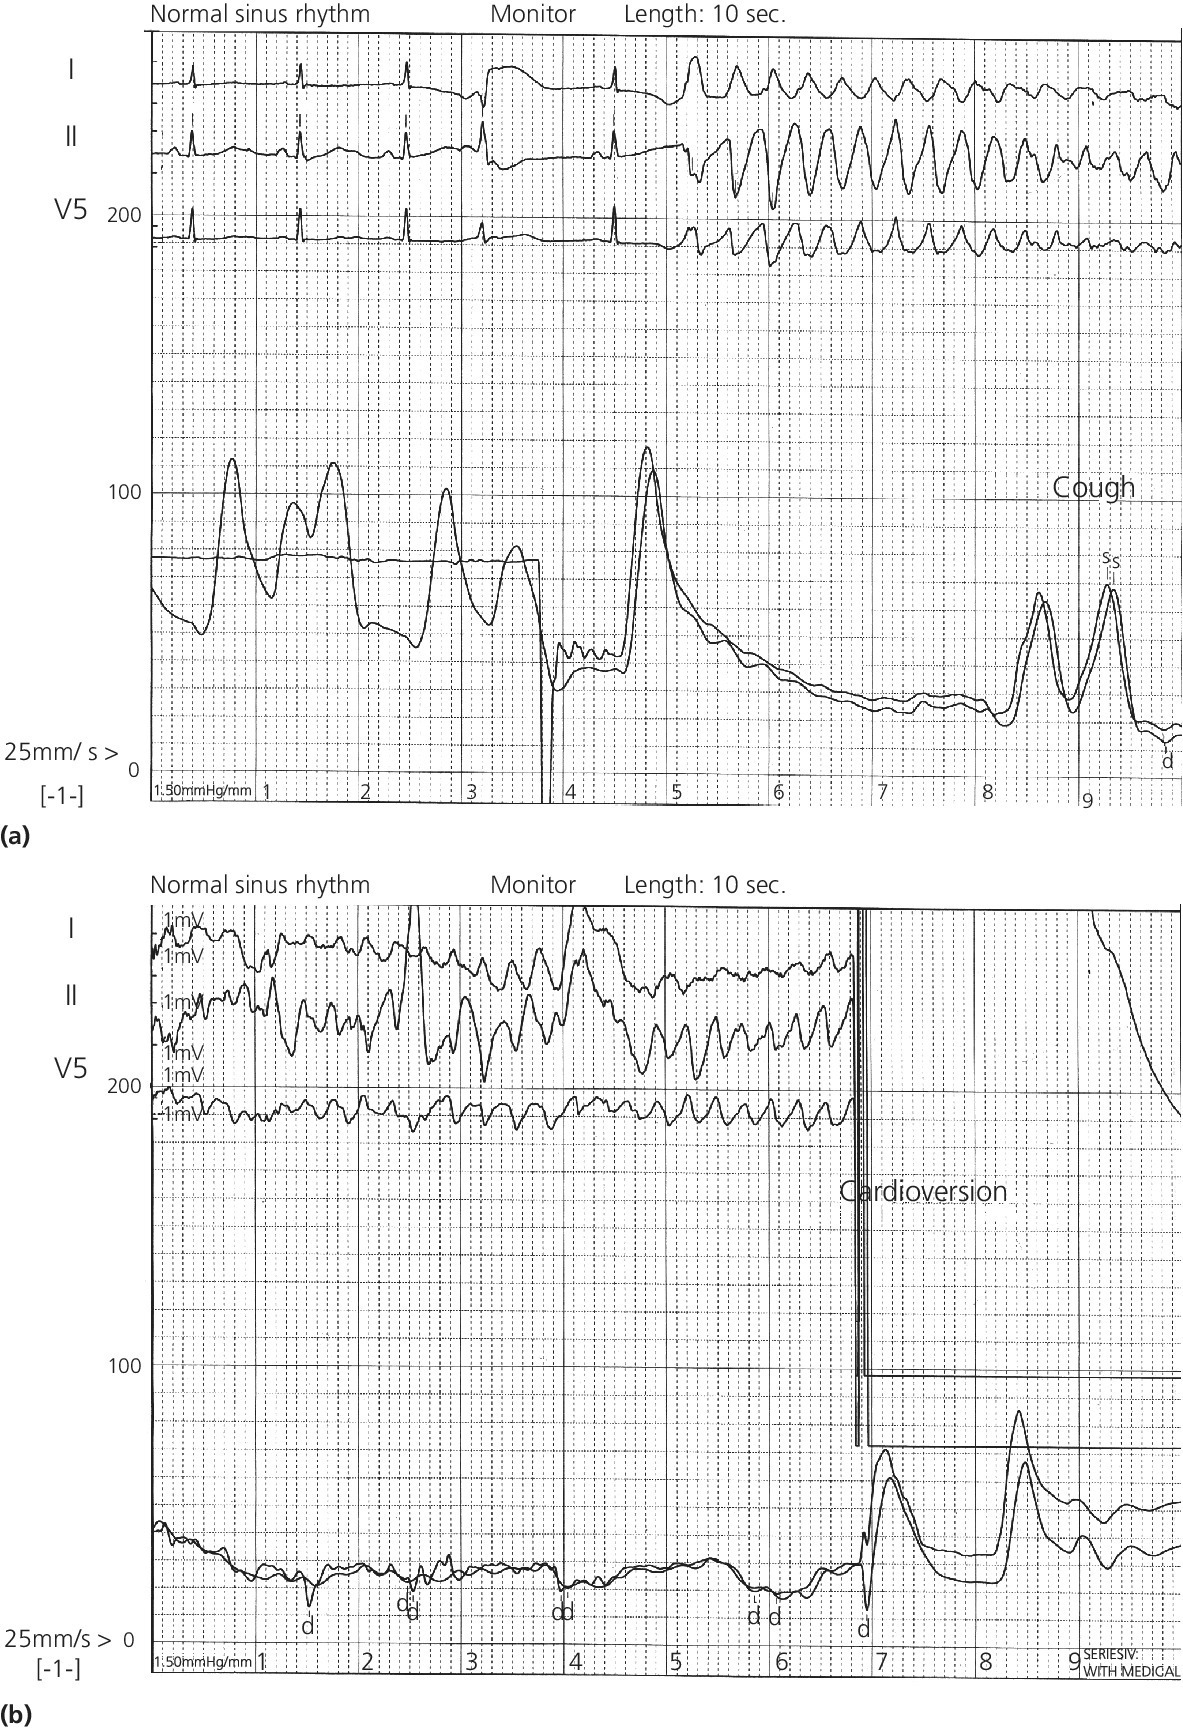 ECGs of patient with ventricular tachycardia, illustrating aortic pressure increase with cough (top) and return of pulsatile blood pressure after electrical cardioversion (bottom).